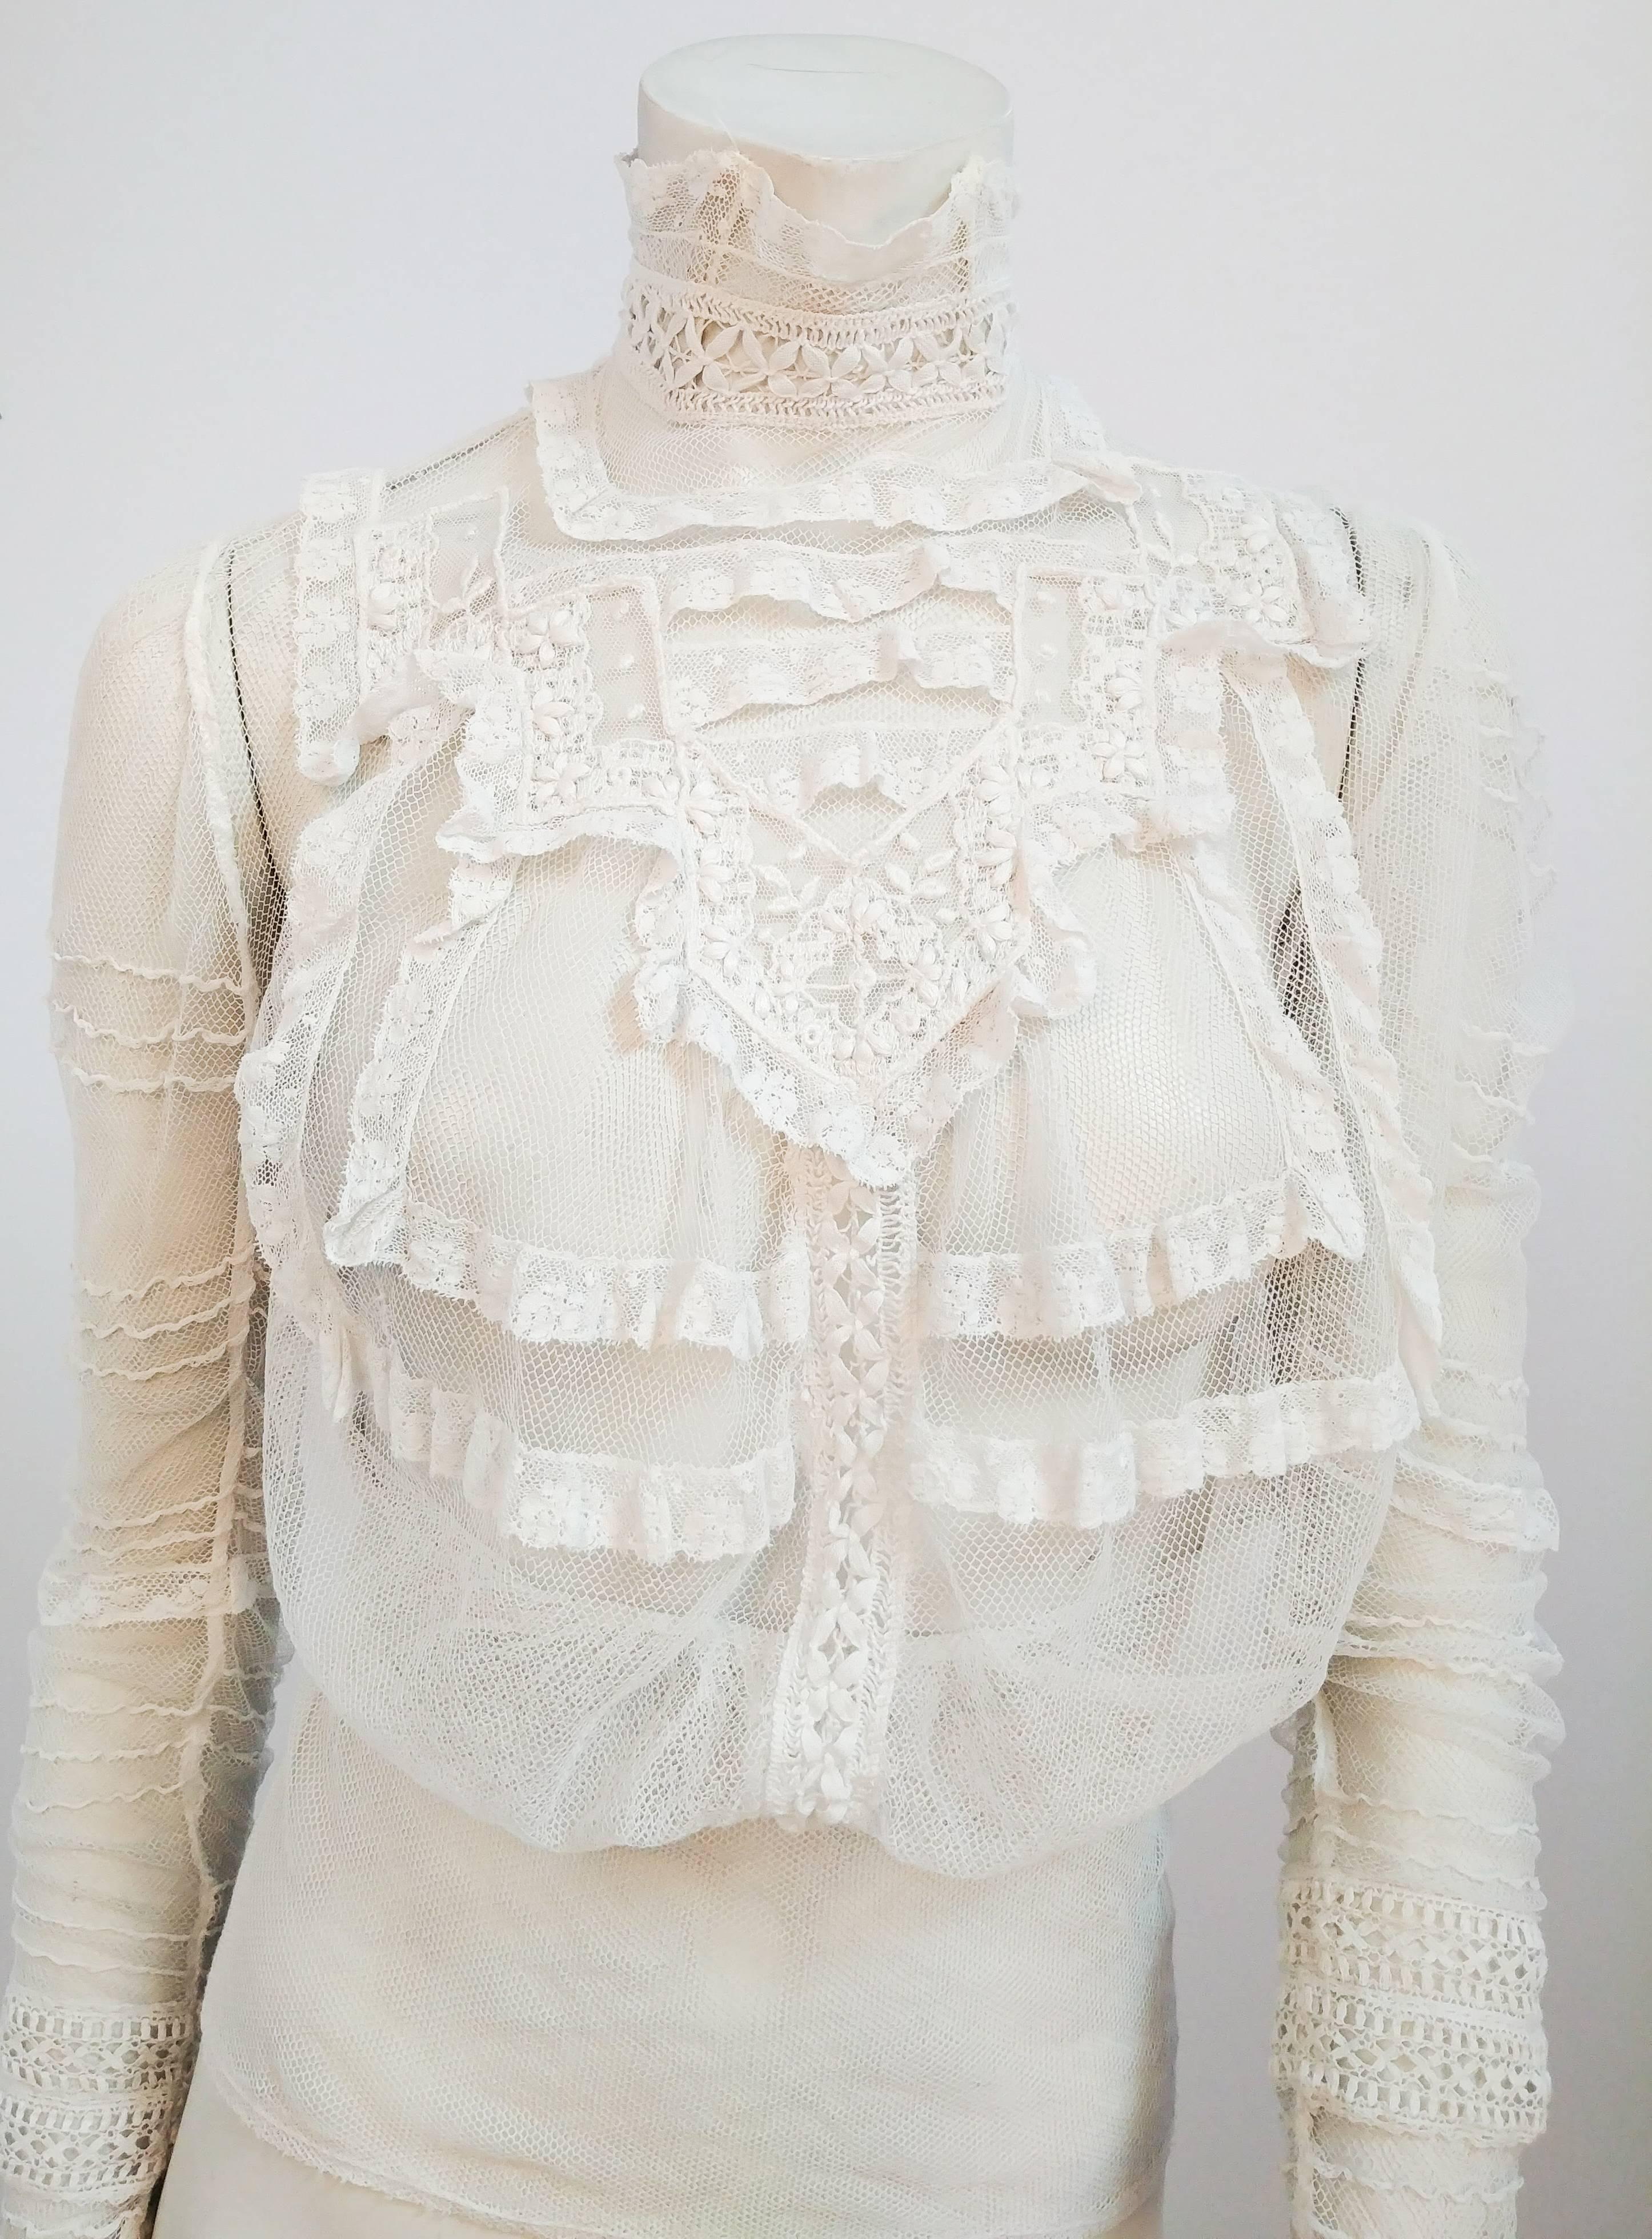 1900s White Lace Sheer Mesh Blouse. Machine lace trim and hand done tension lace